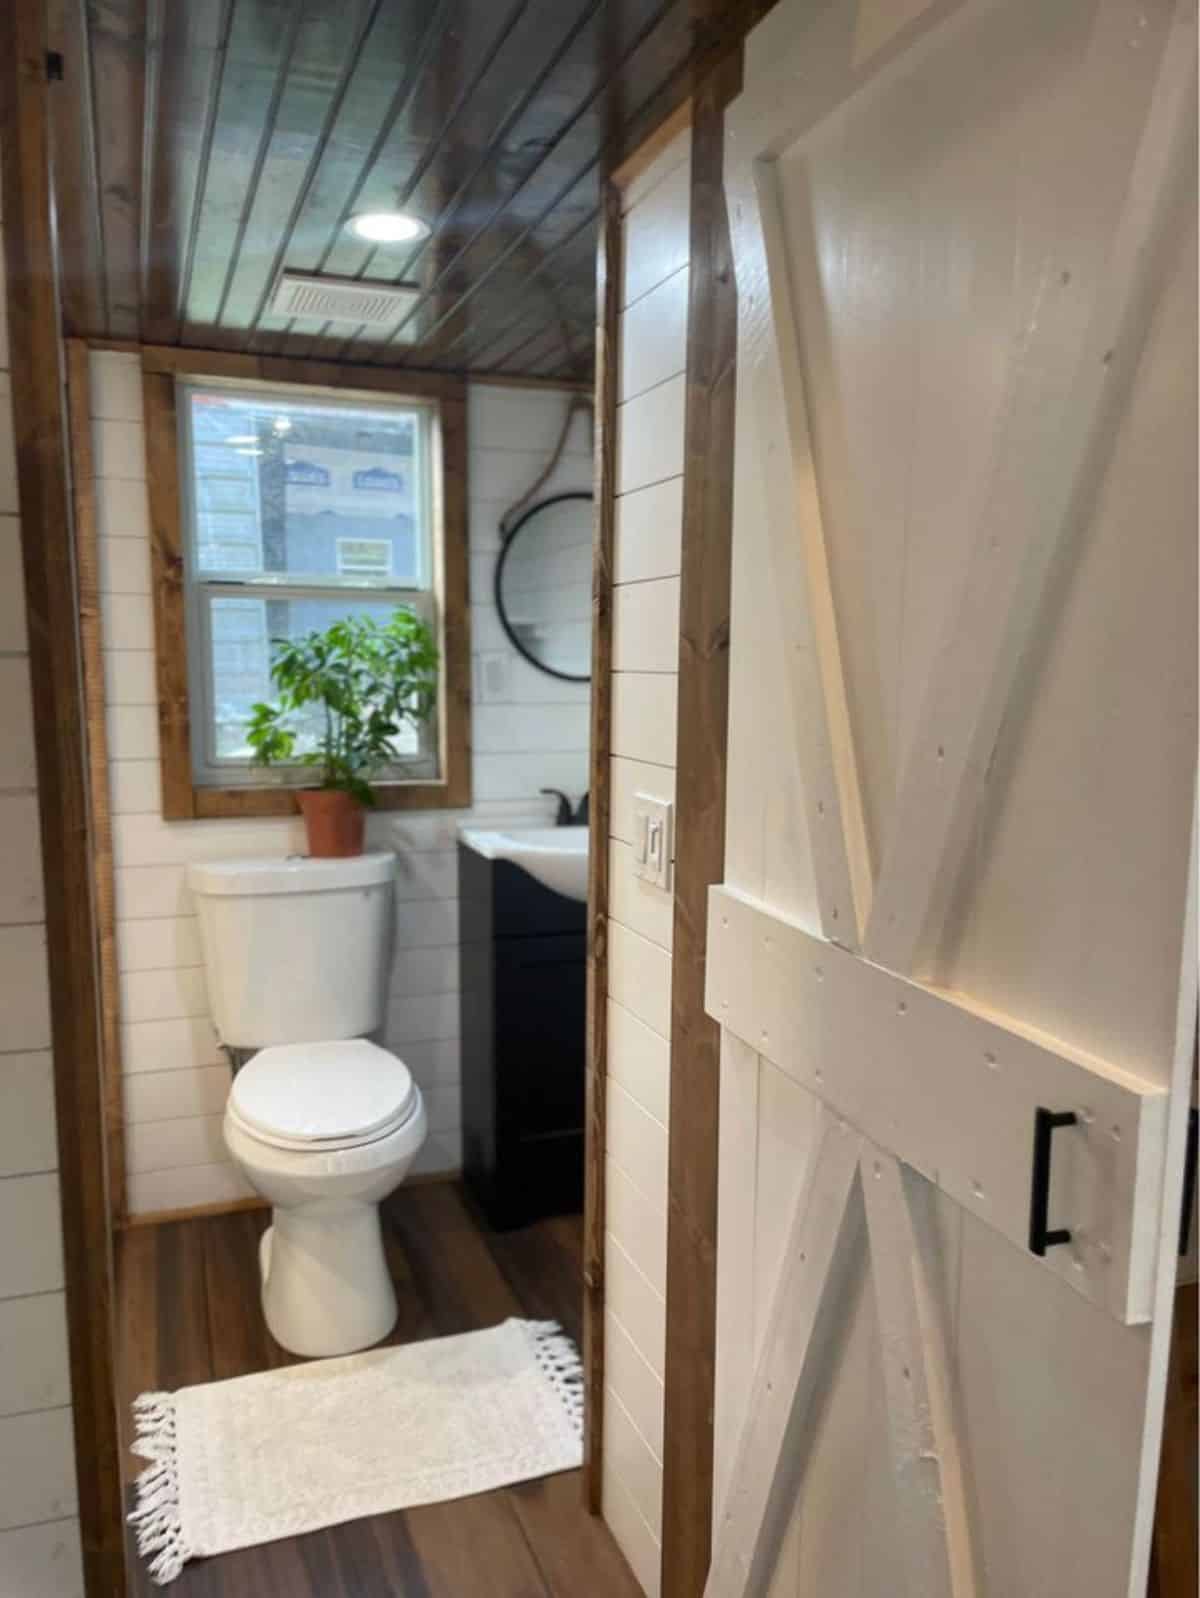 standard toilet in bathroom of 24’ tiny house on wheels